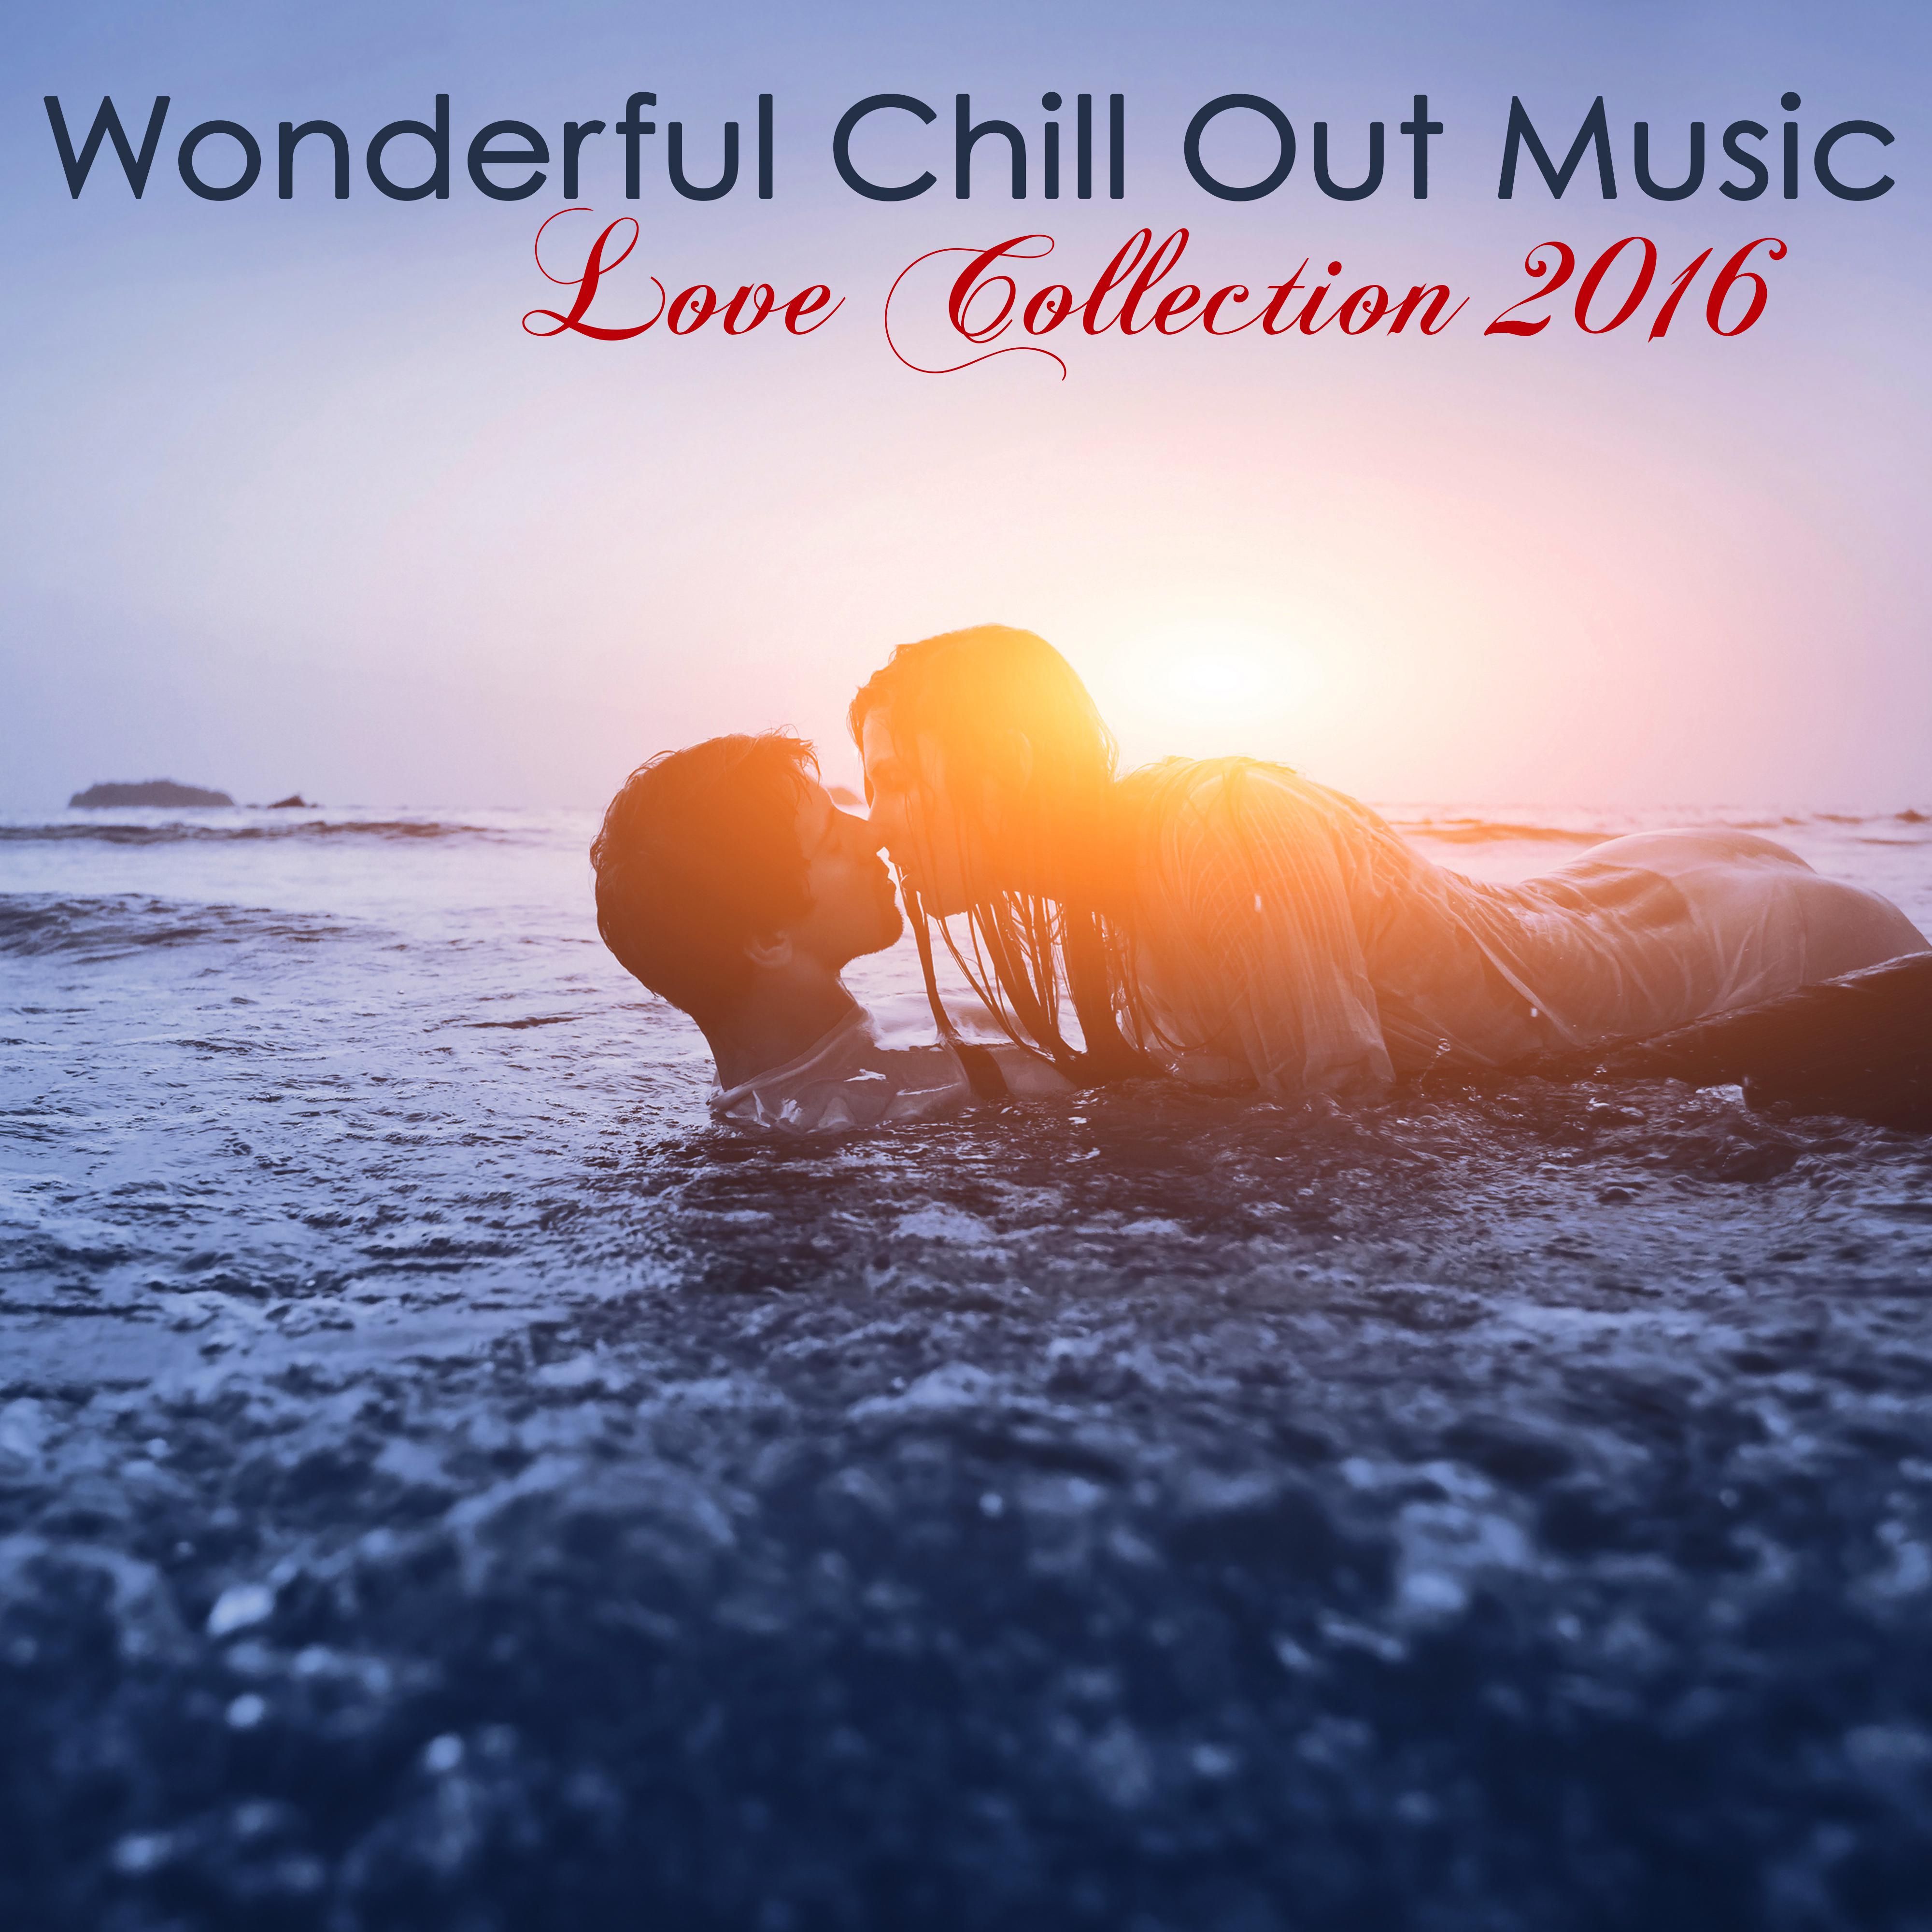 Wonderful Chill Out Music Love Collection 2016